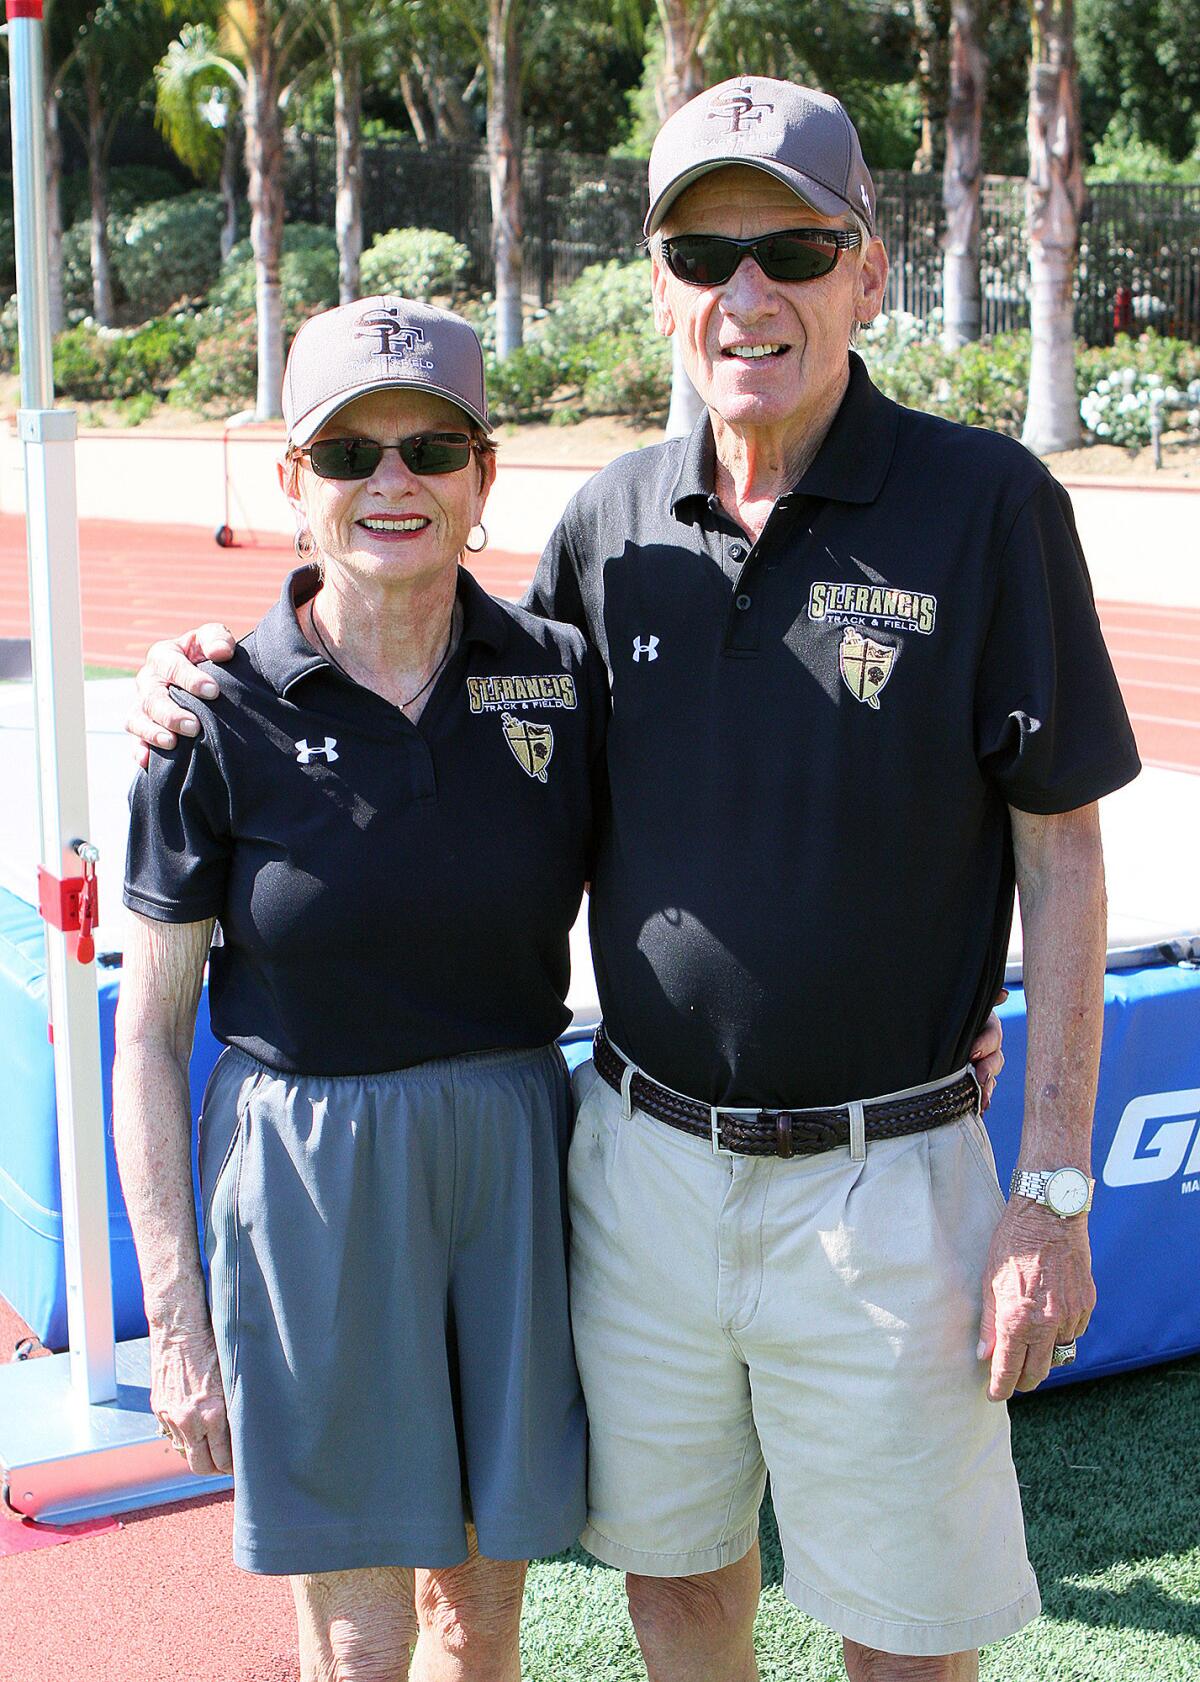 Kathy and Bert Bergen at a St. Francis track meet at St. Francis High School on Thursday, April 21, 2016.